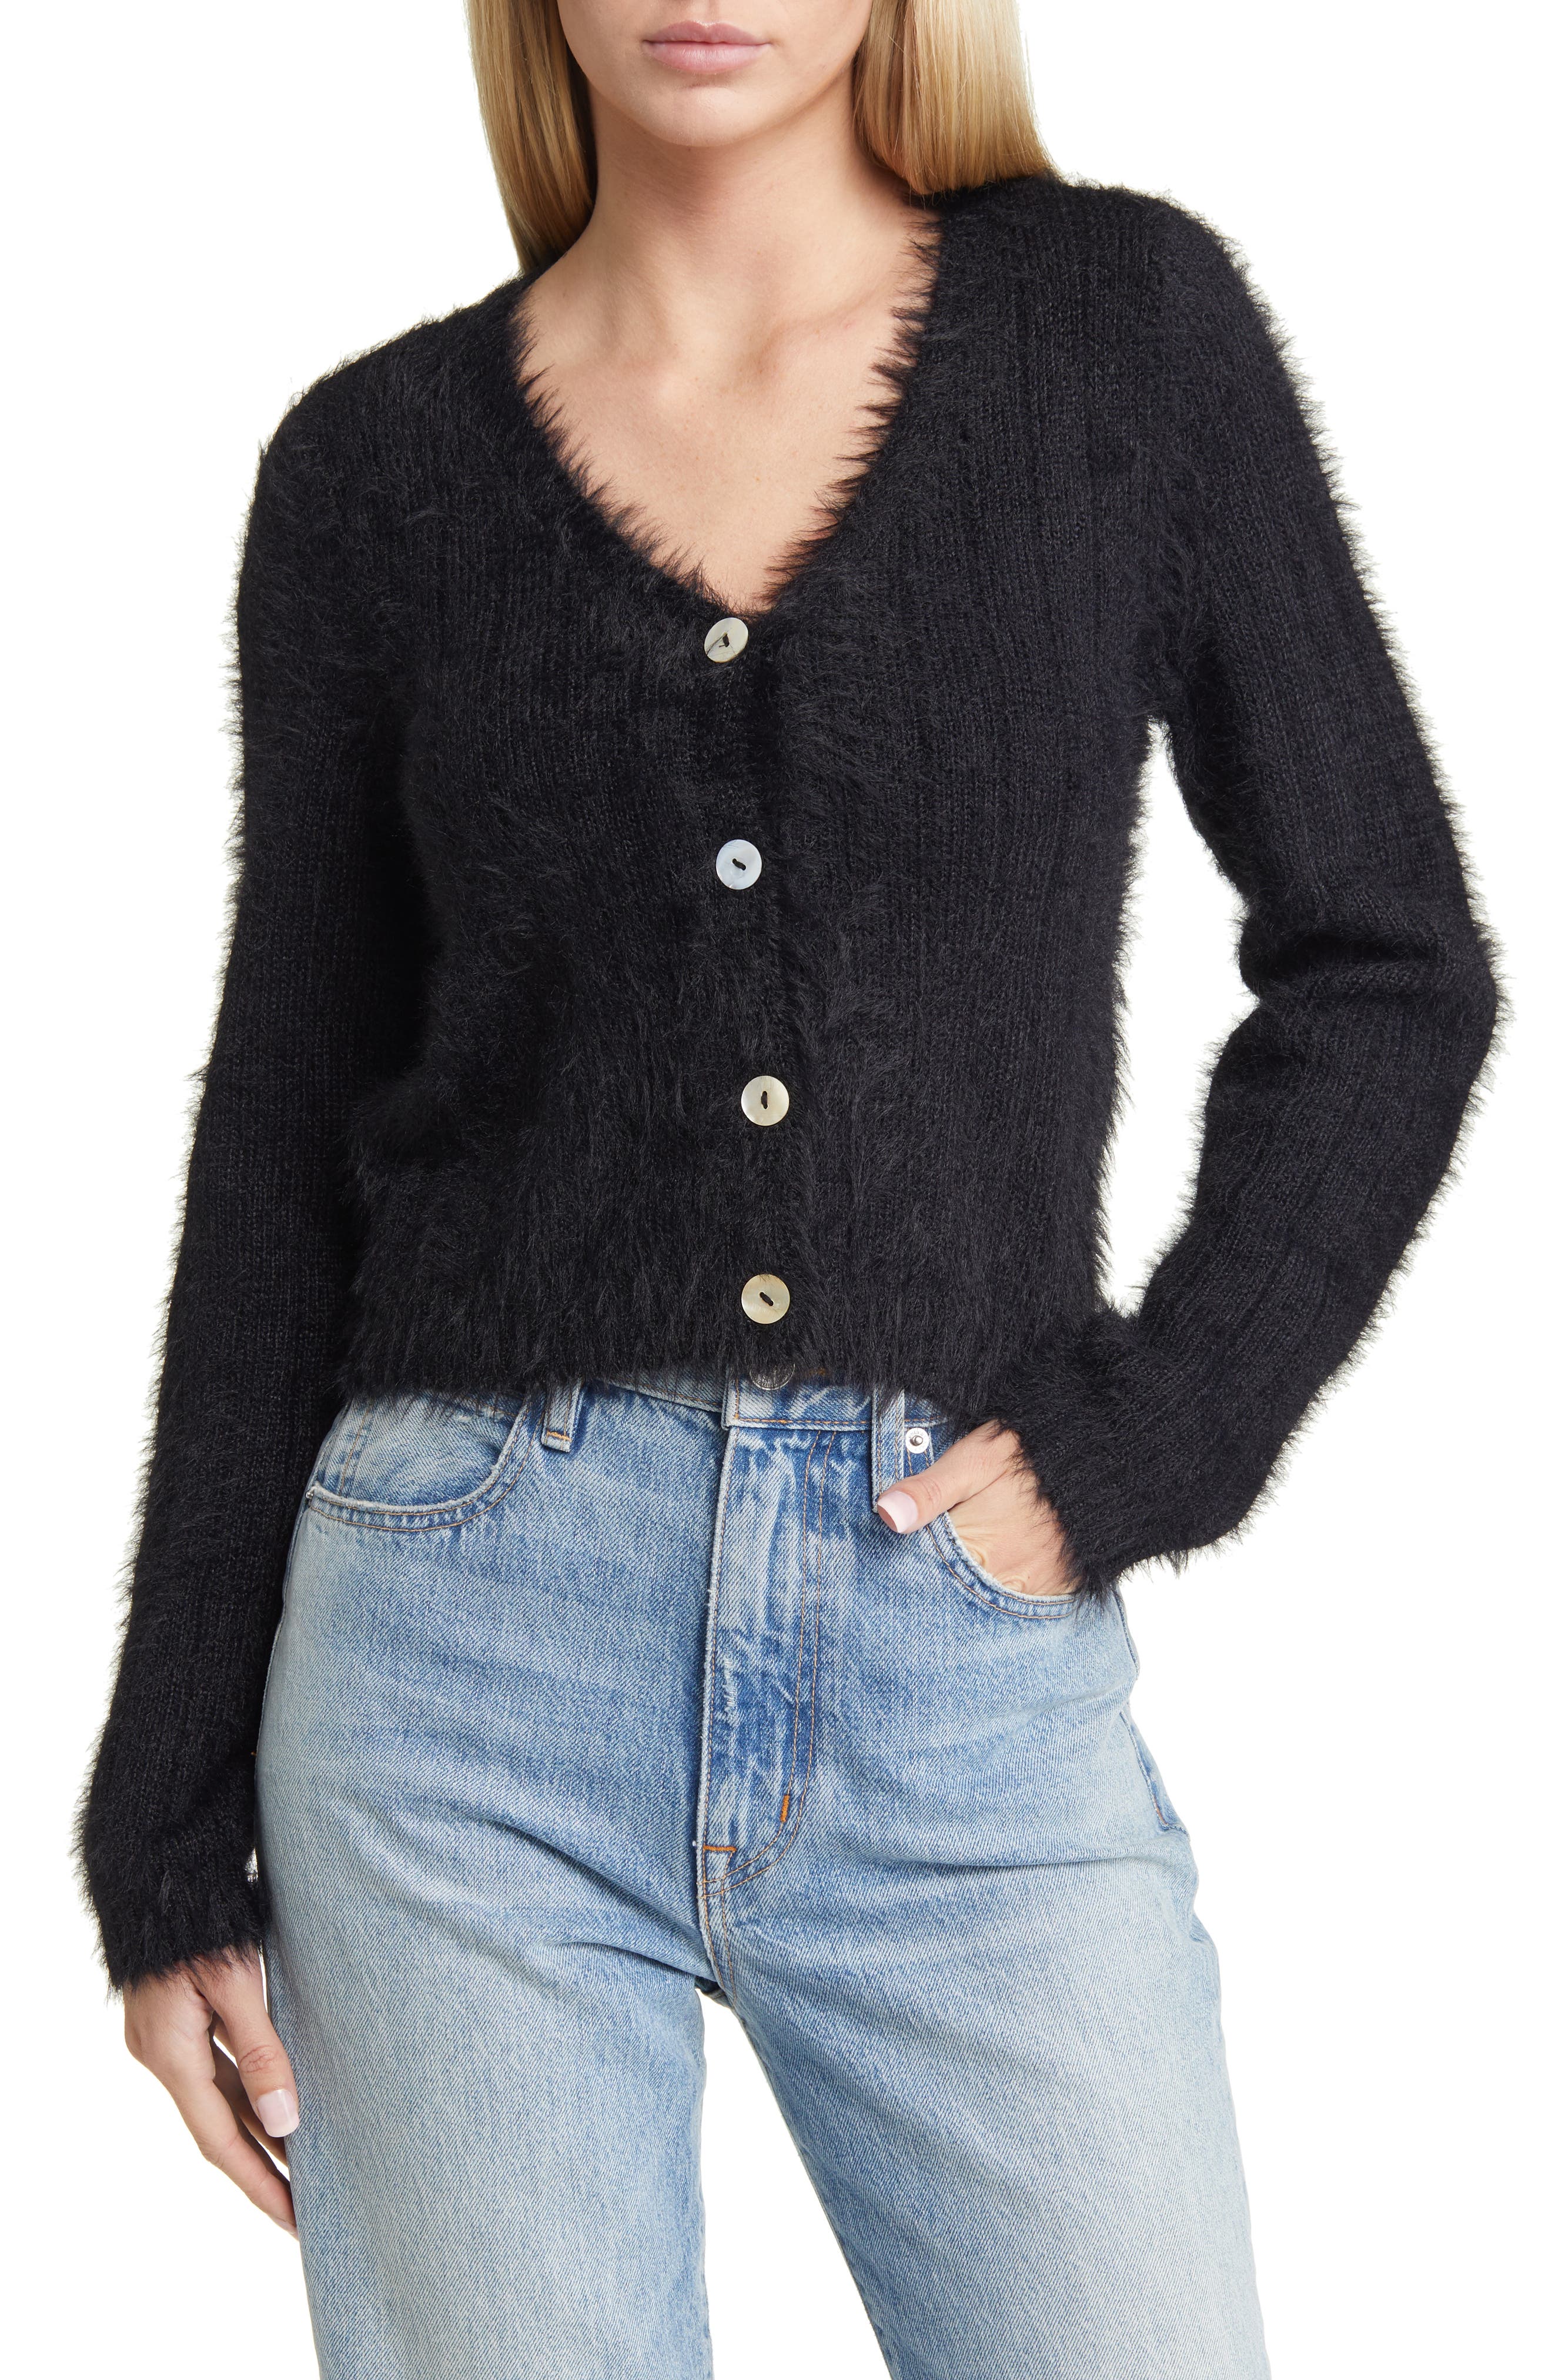 Fashion Sweaters Coarse Knitted Sweaters Vero Moda Coarse Knitted Sweater black cable stitch casual look 